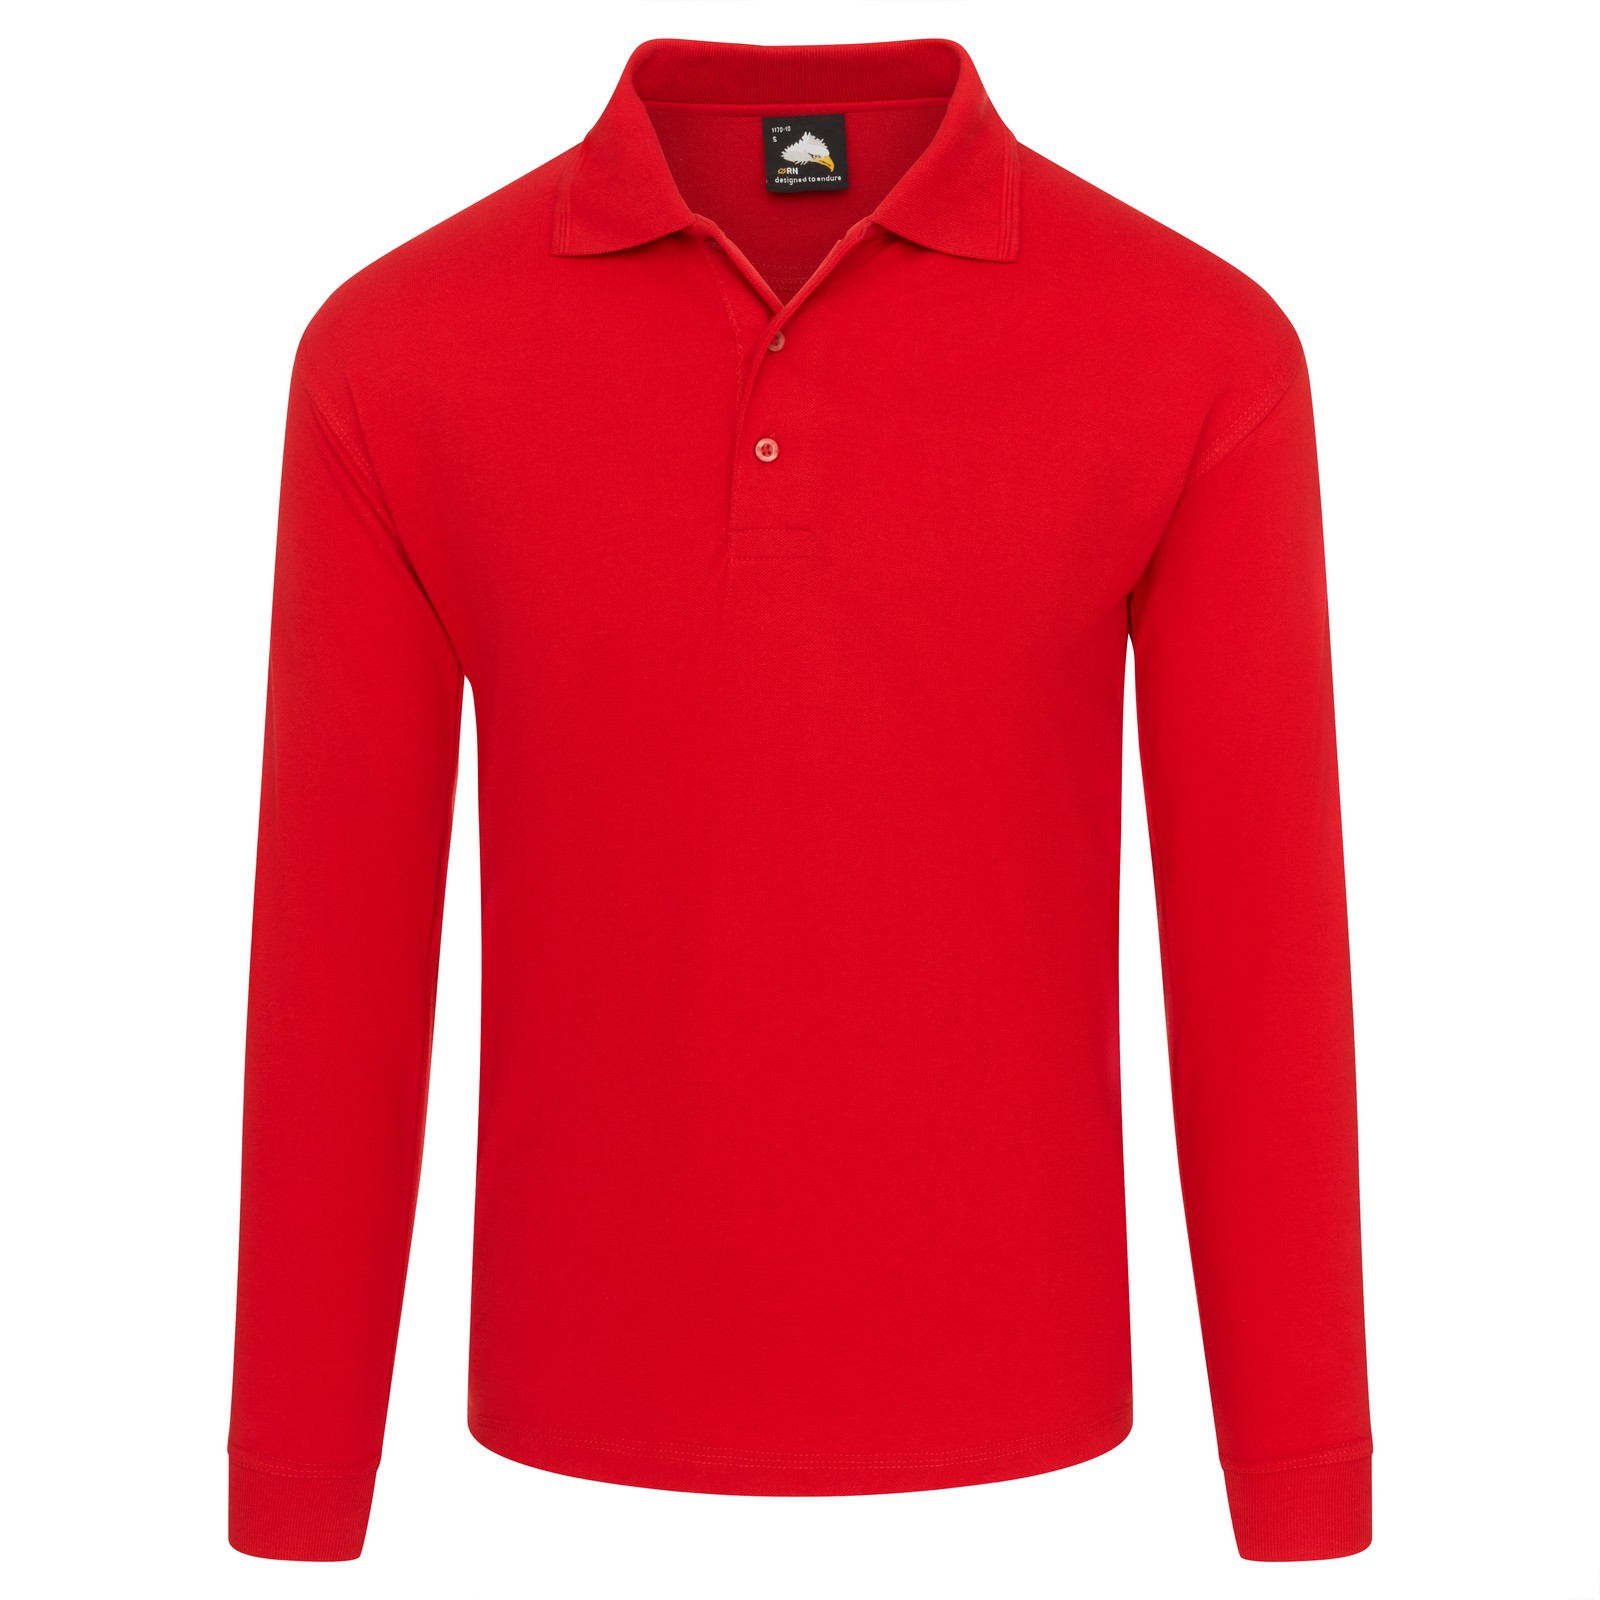 Premium long sleeve polo shirt | WISE Worksafe